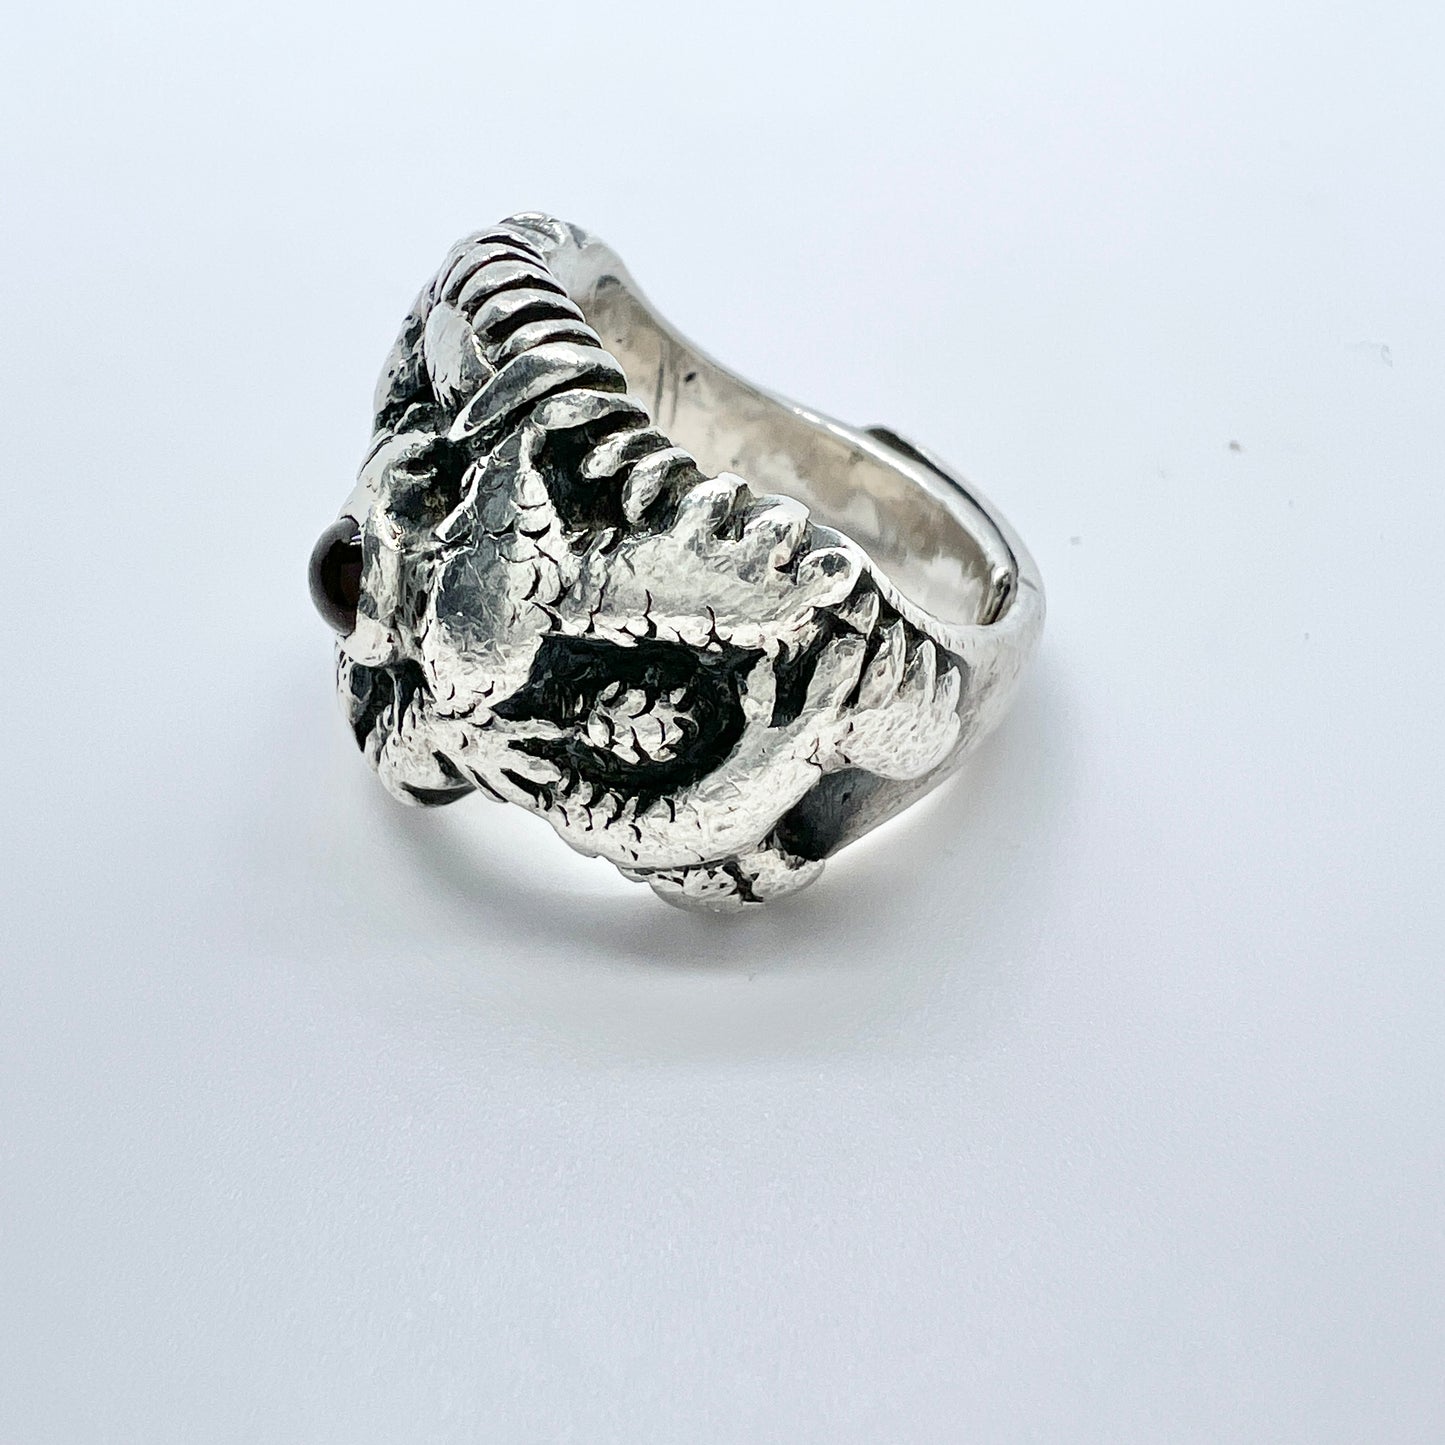 Carl Schon, Baltimore early 1900s. Antique Sterling Silver Garnet Dragon Ring.